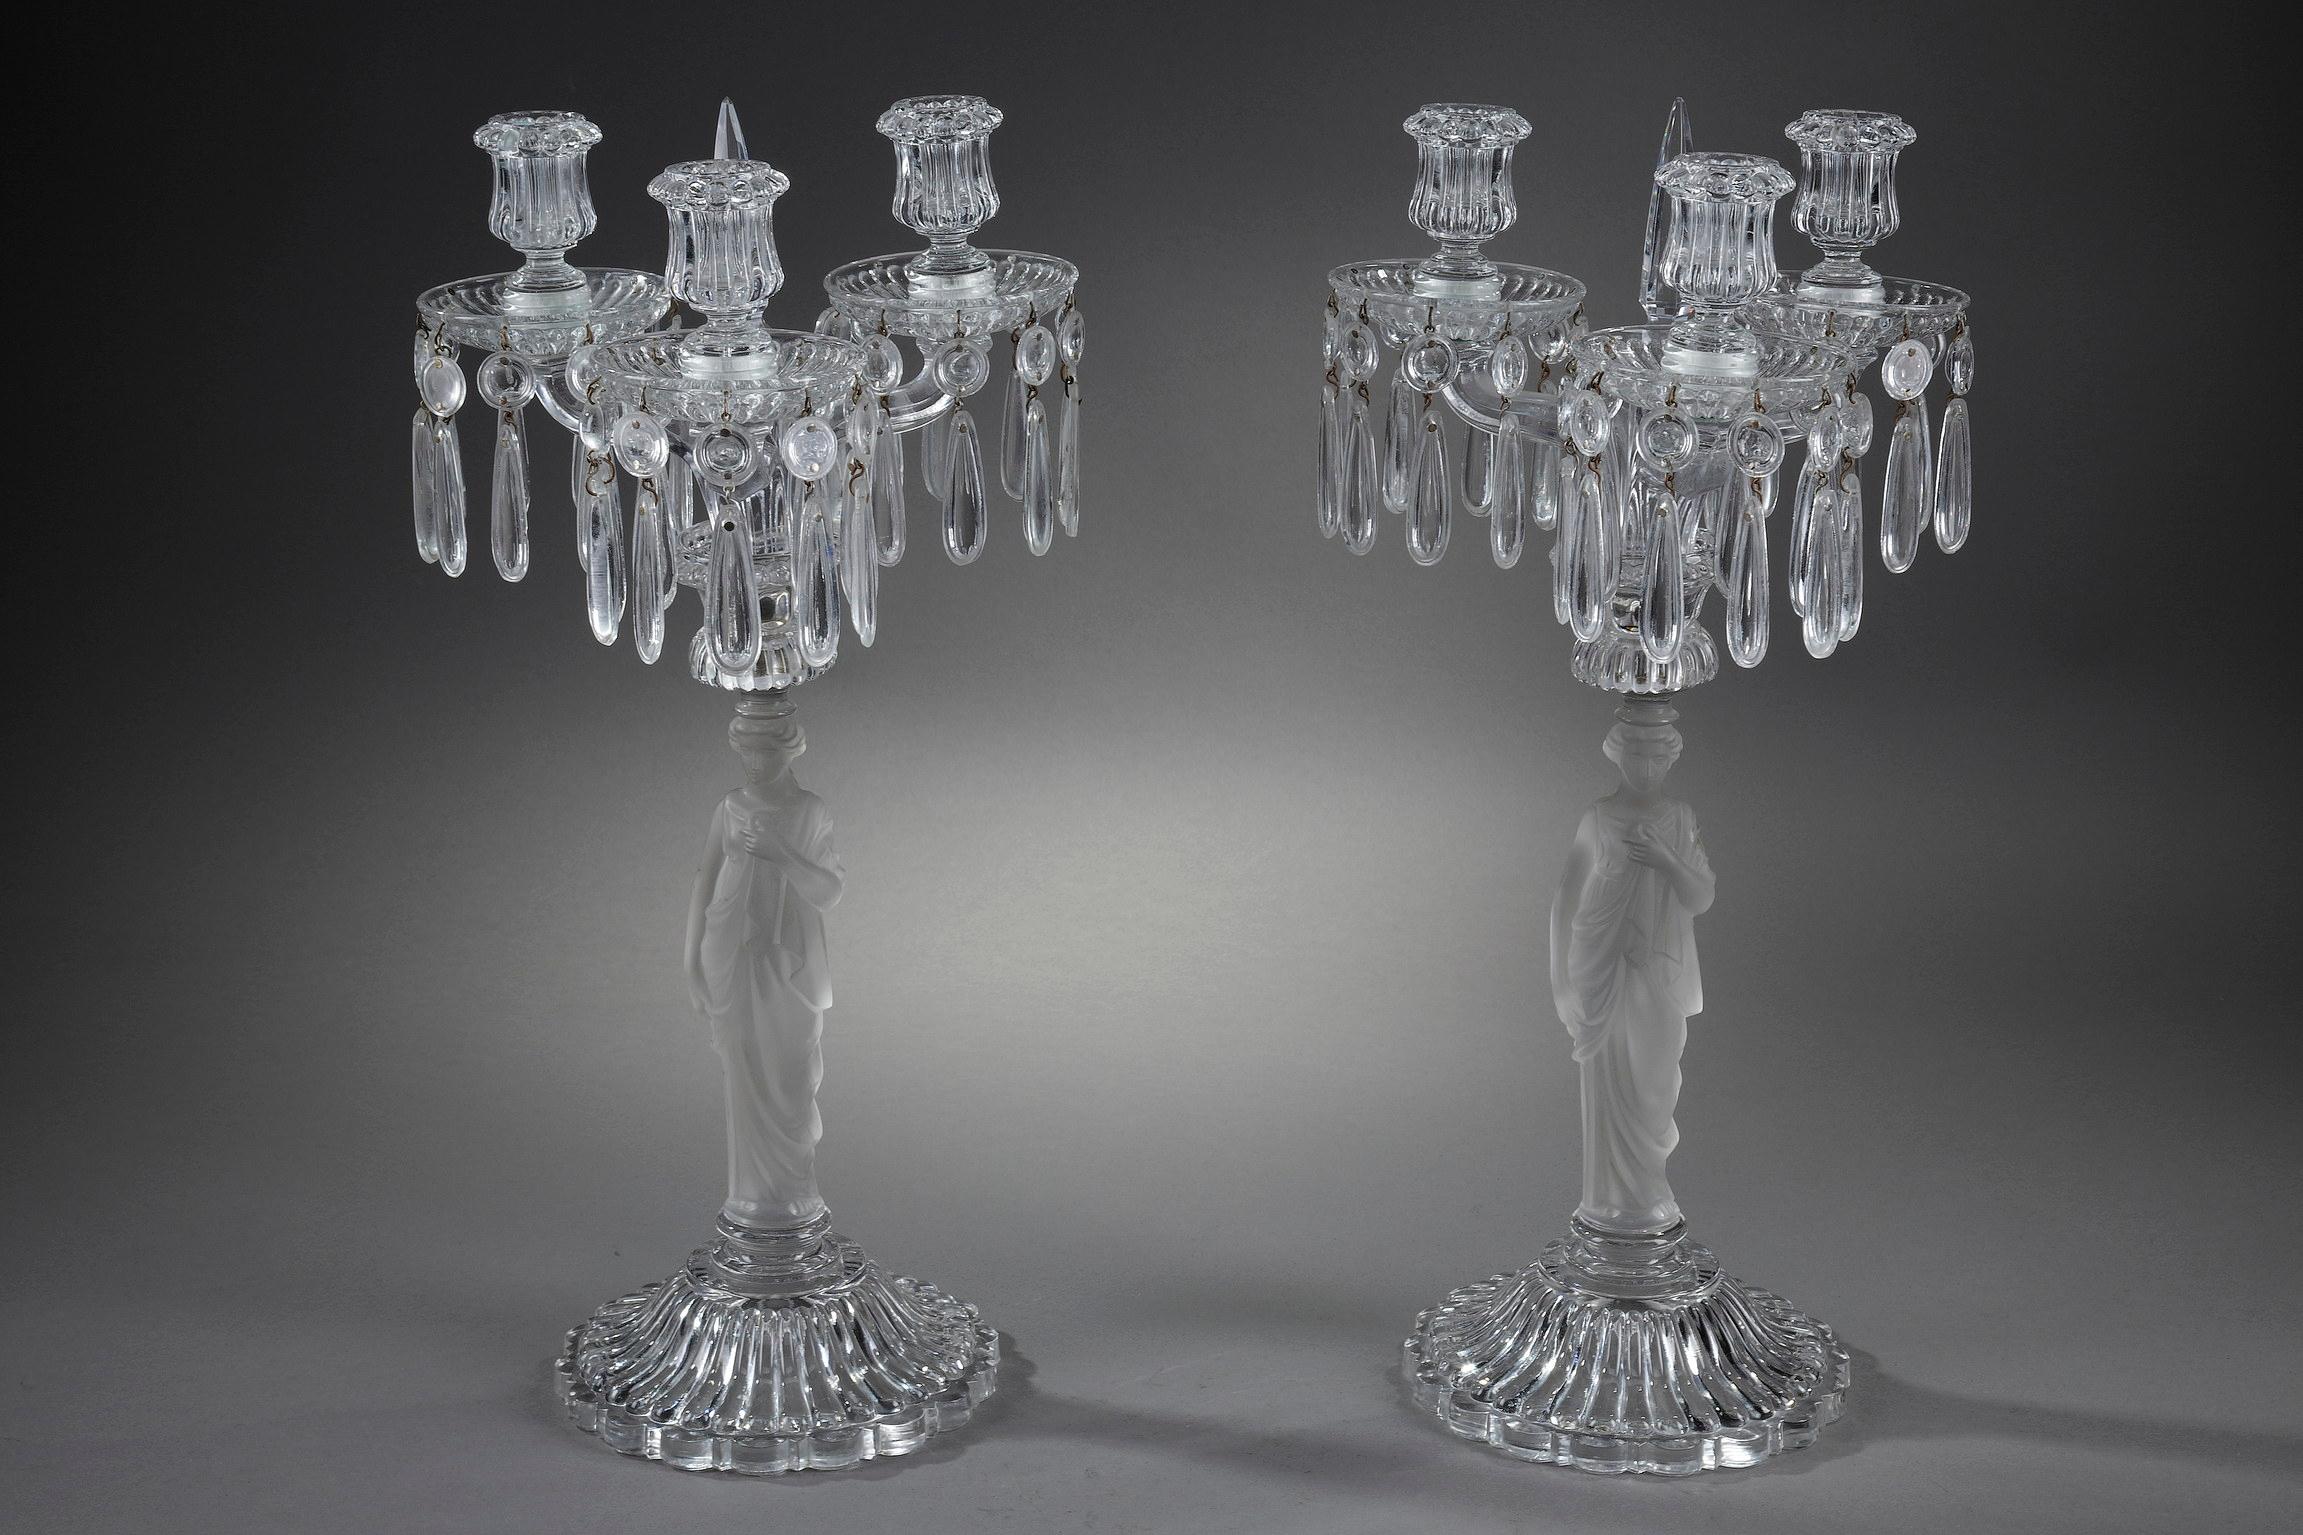 Molded Rare Pair of Baccarat Crystal Candelabras